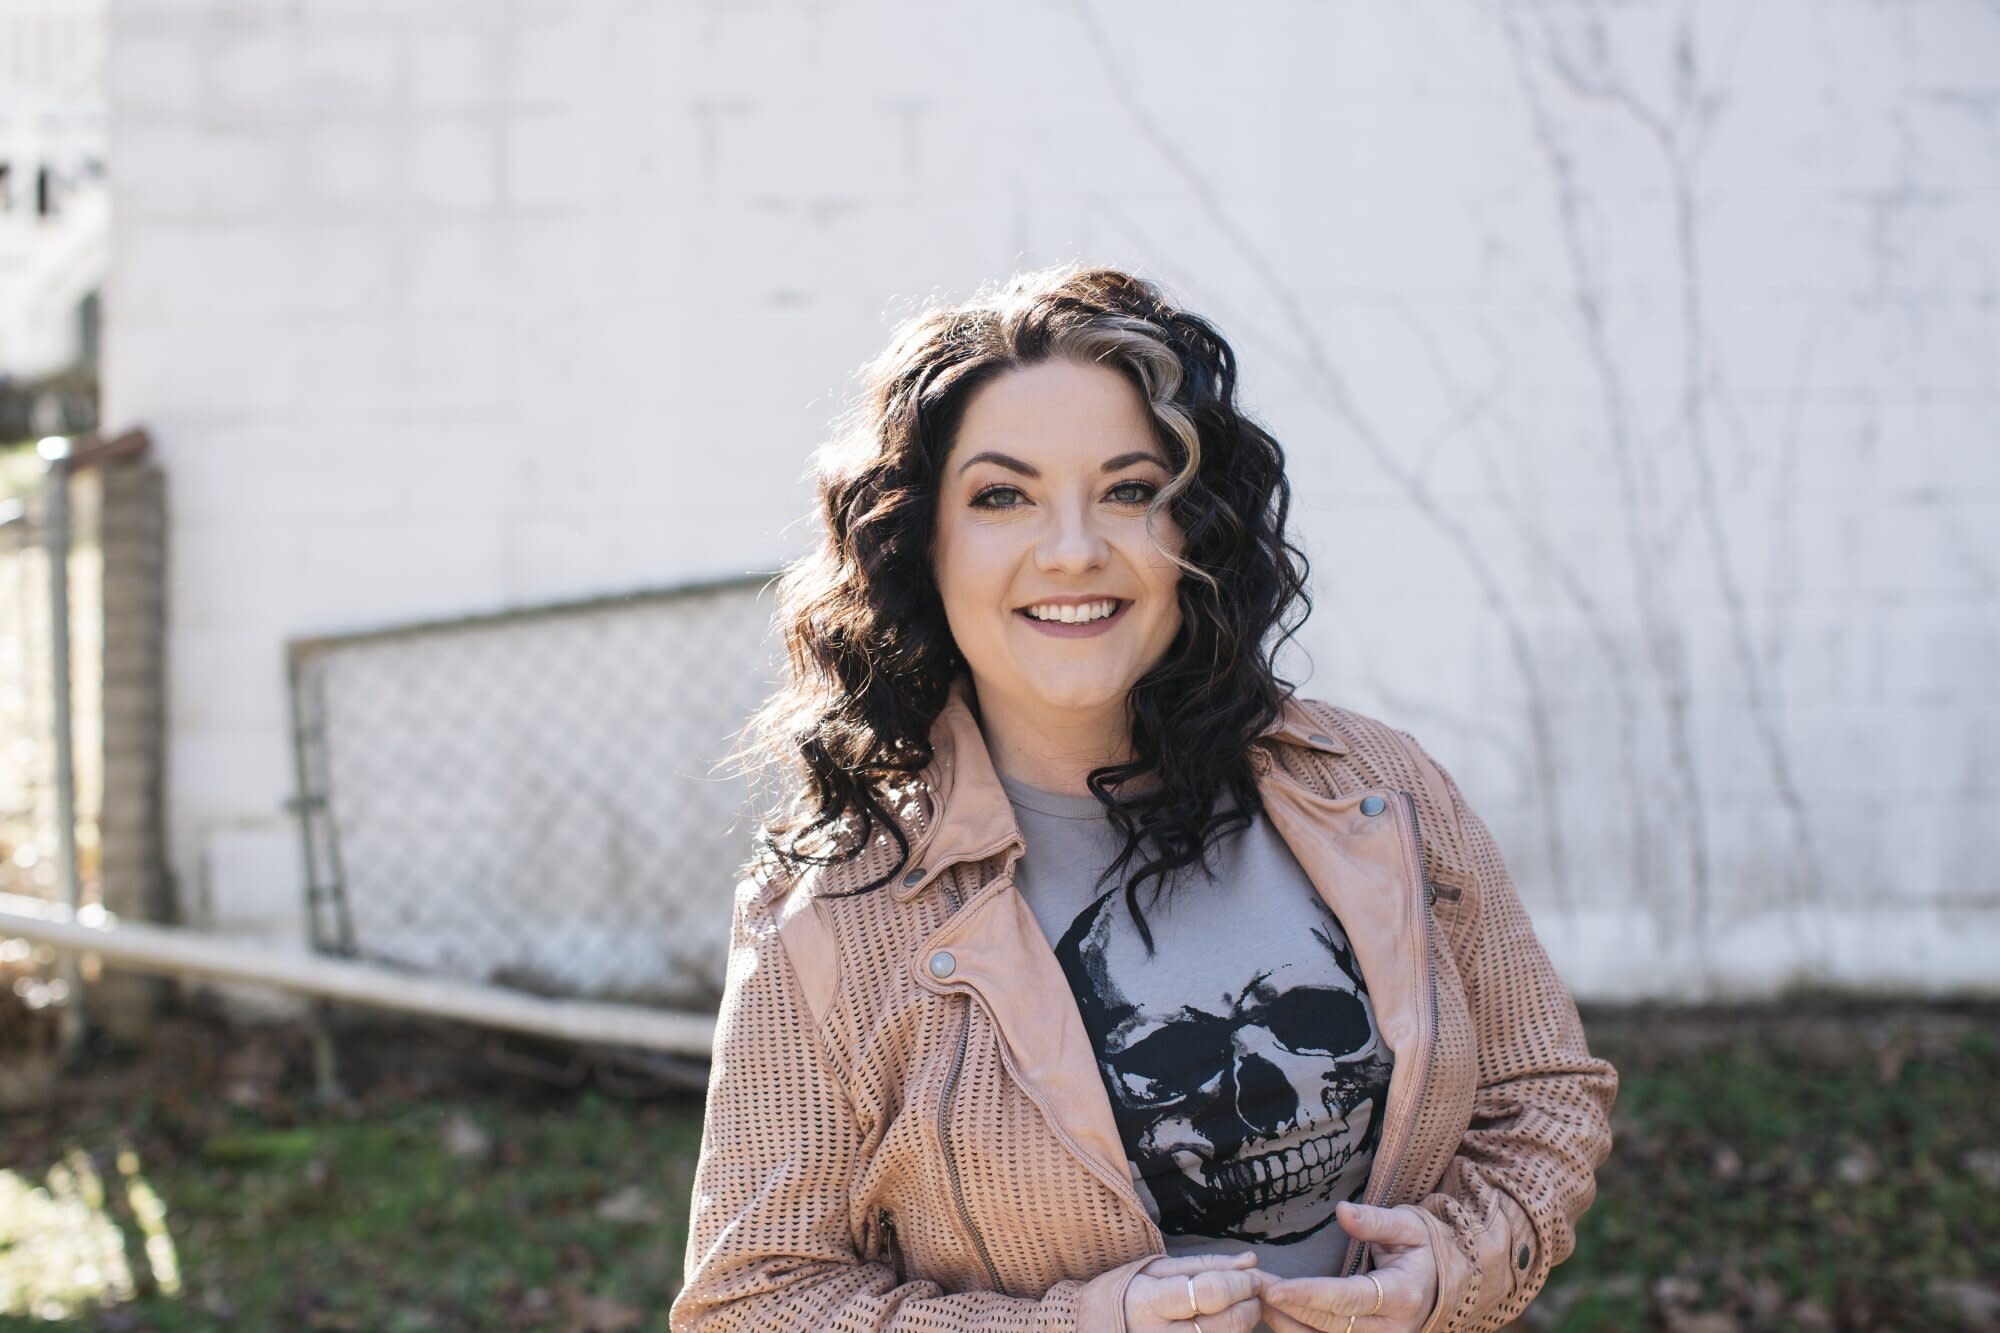 7. Ashley McBryde's Chest Tattoo: A Reflection of Her Music and Journey - wide 6